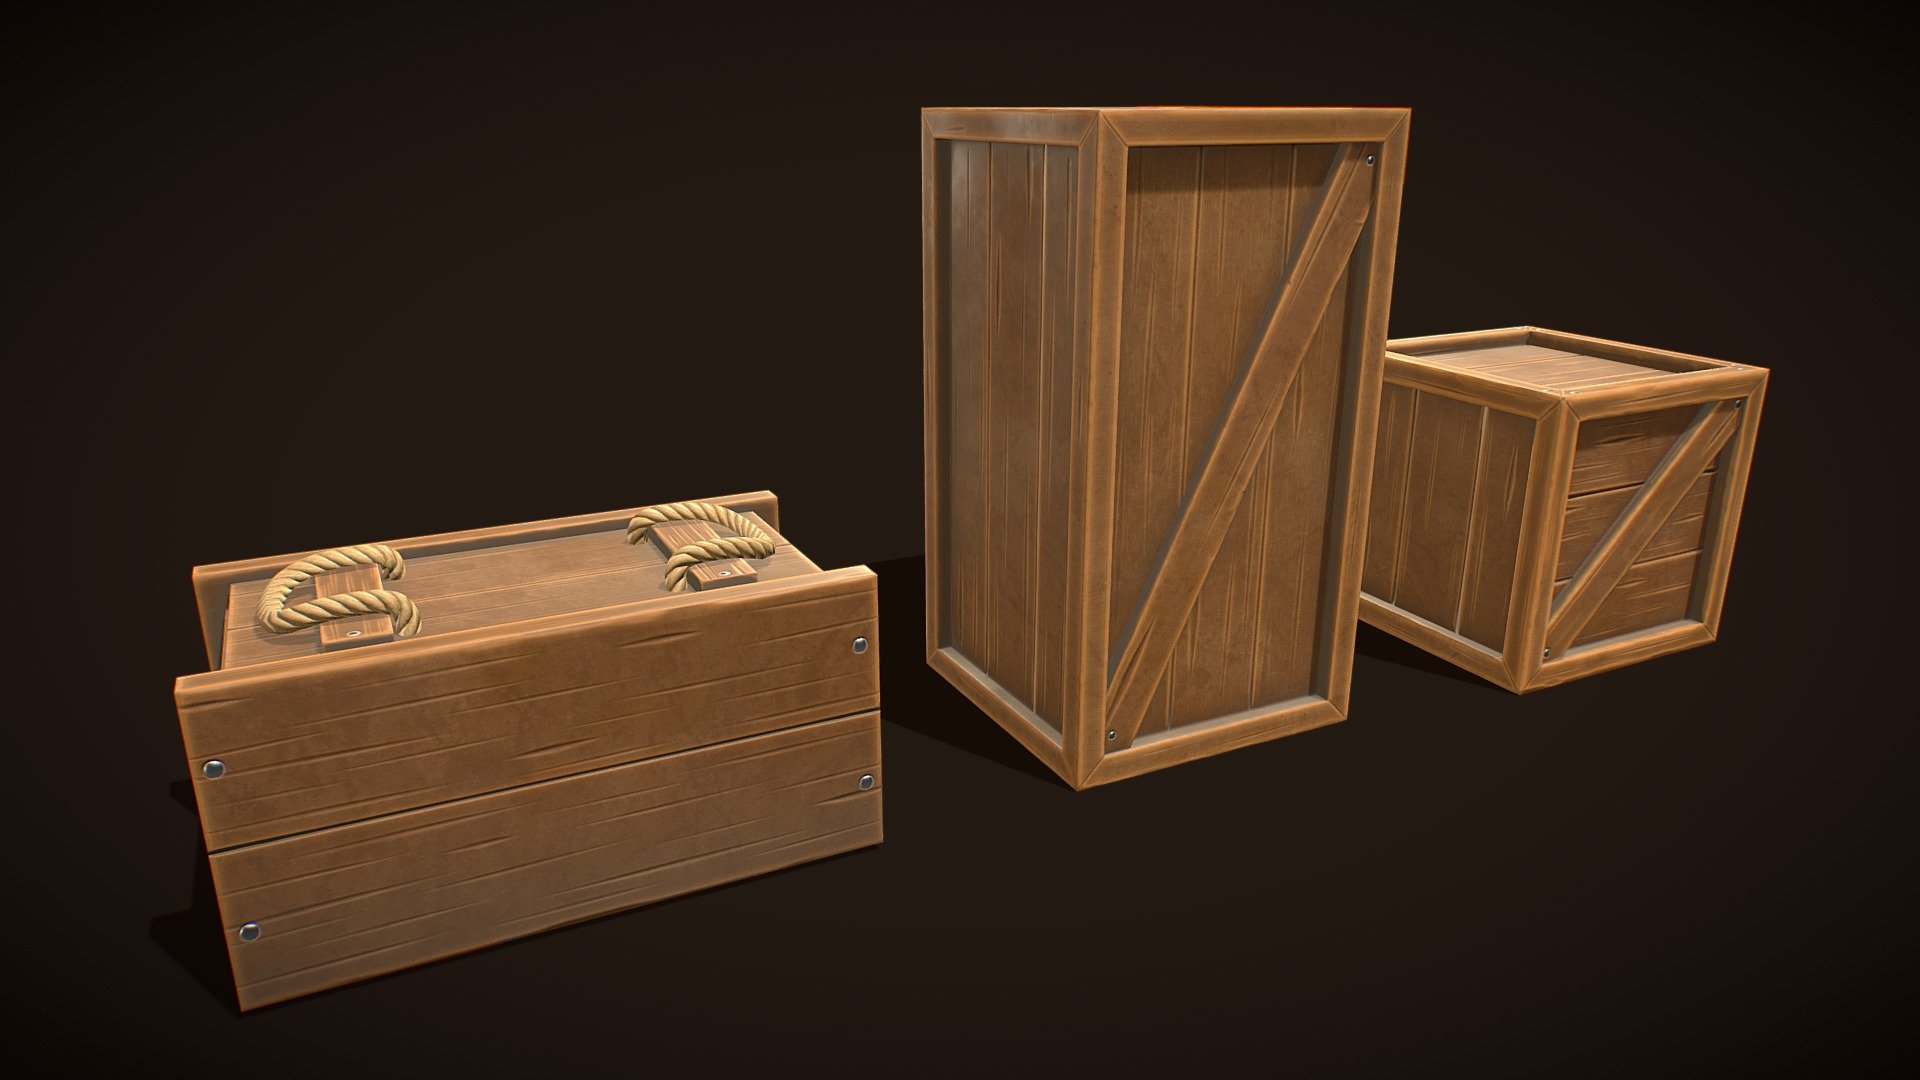 Stylized Western Wooden Boxes, with Stylized PBR Textures. Ready to use in any project.

Are you liked this models? Feel free to take a look on my another models! Here

Features:

.Fbx, .Obj, .Uasset and .Blend files.

Low Poly Mesh game-ready.

Real-World Scale (centimeters).

Number of models: 3

Unreal Project: 4.15+

Custom Collision for Unreal Engine 4 (Handmade).

Tris Count: 120 to 996.

Number of Textures:15

Number of Textures (UE4): 9

PBR Textures (2048x2048) (PNG).

Type of Textures: Base Color, Roughness, Metallic, Normal Map and Ambient Occlusion (PNG) 3d model